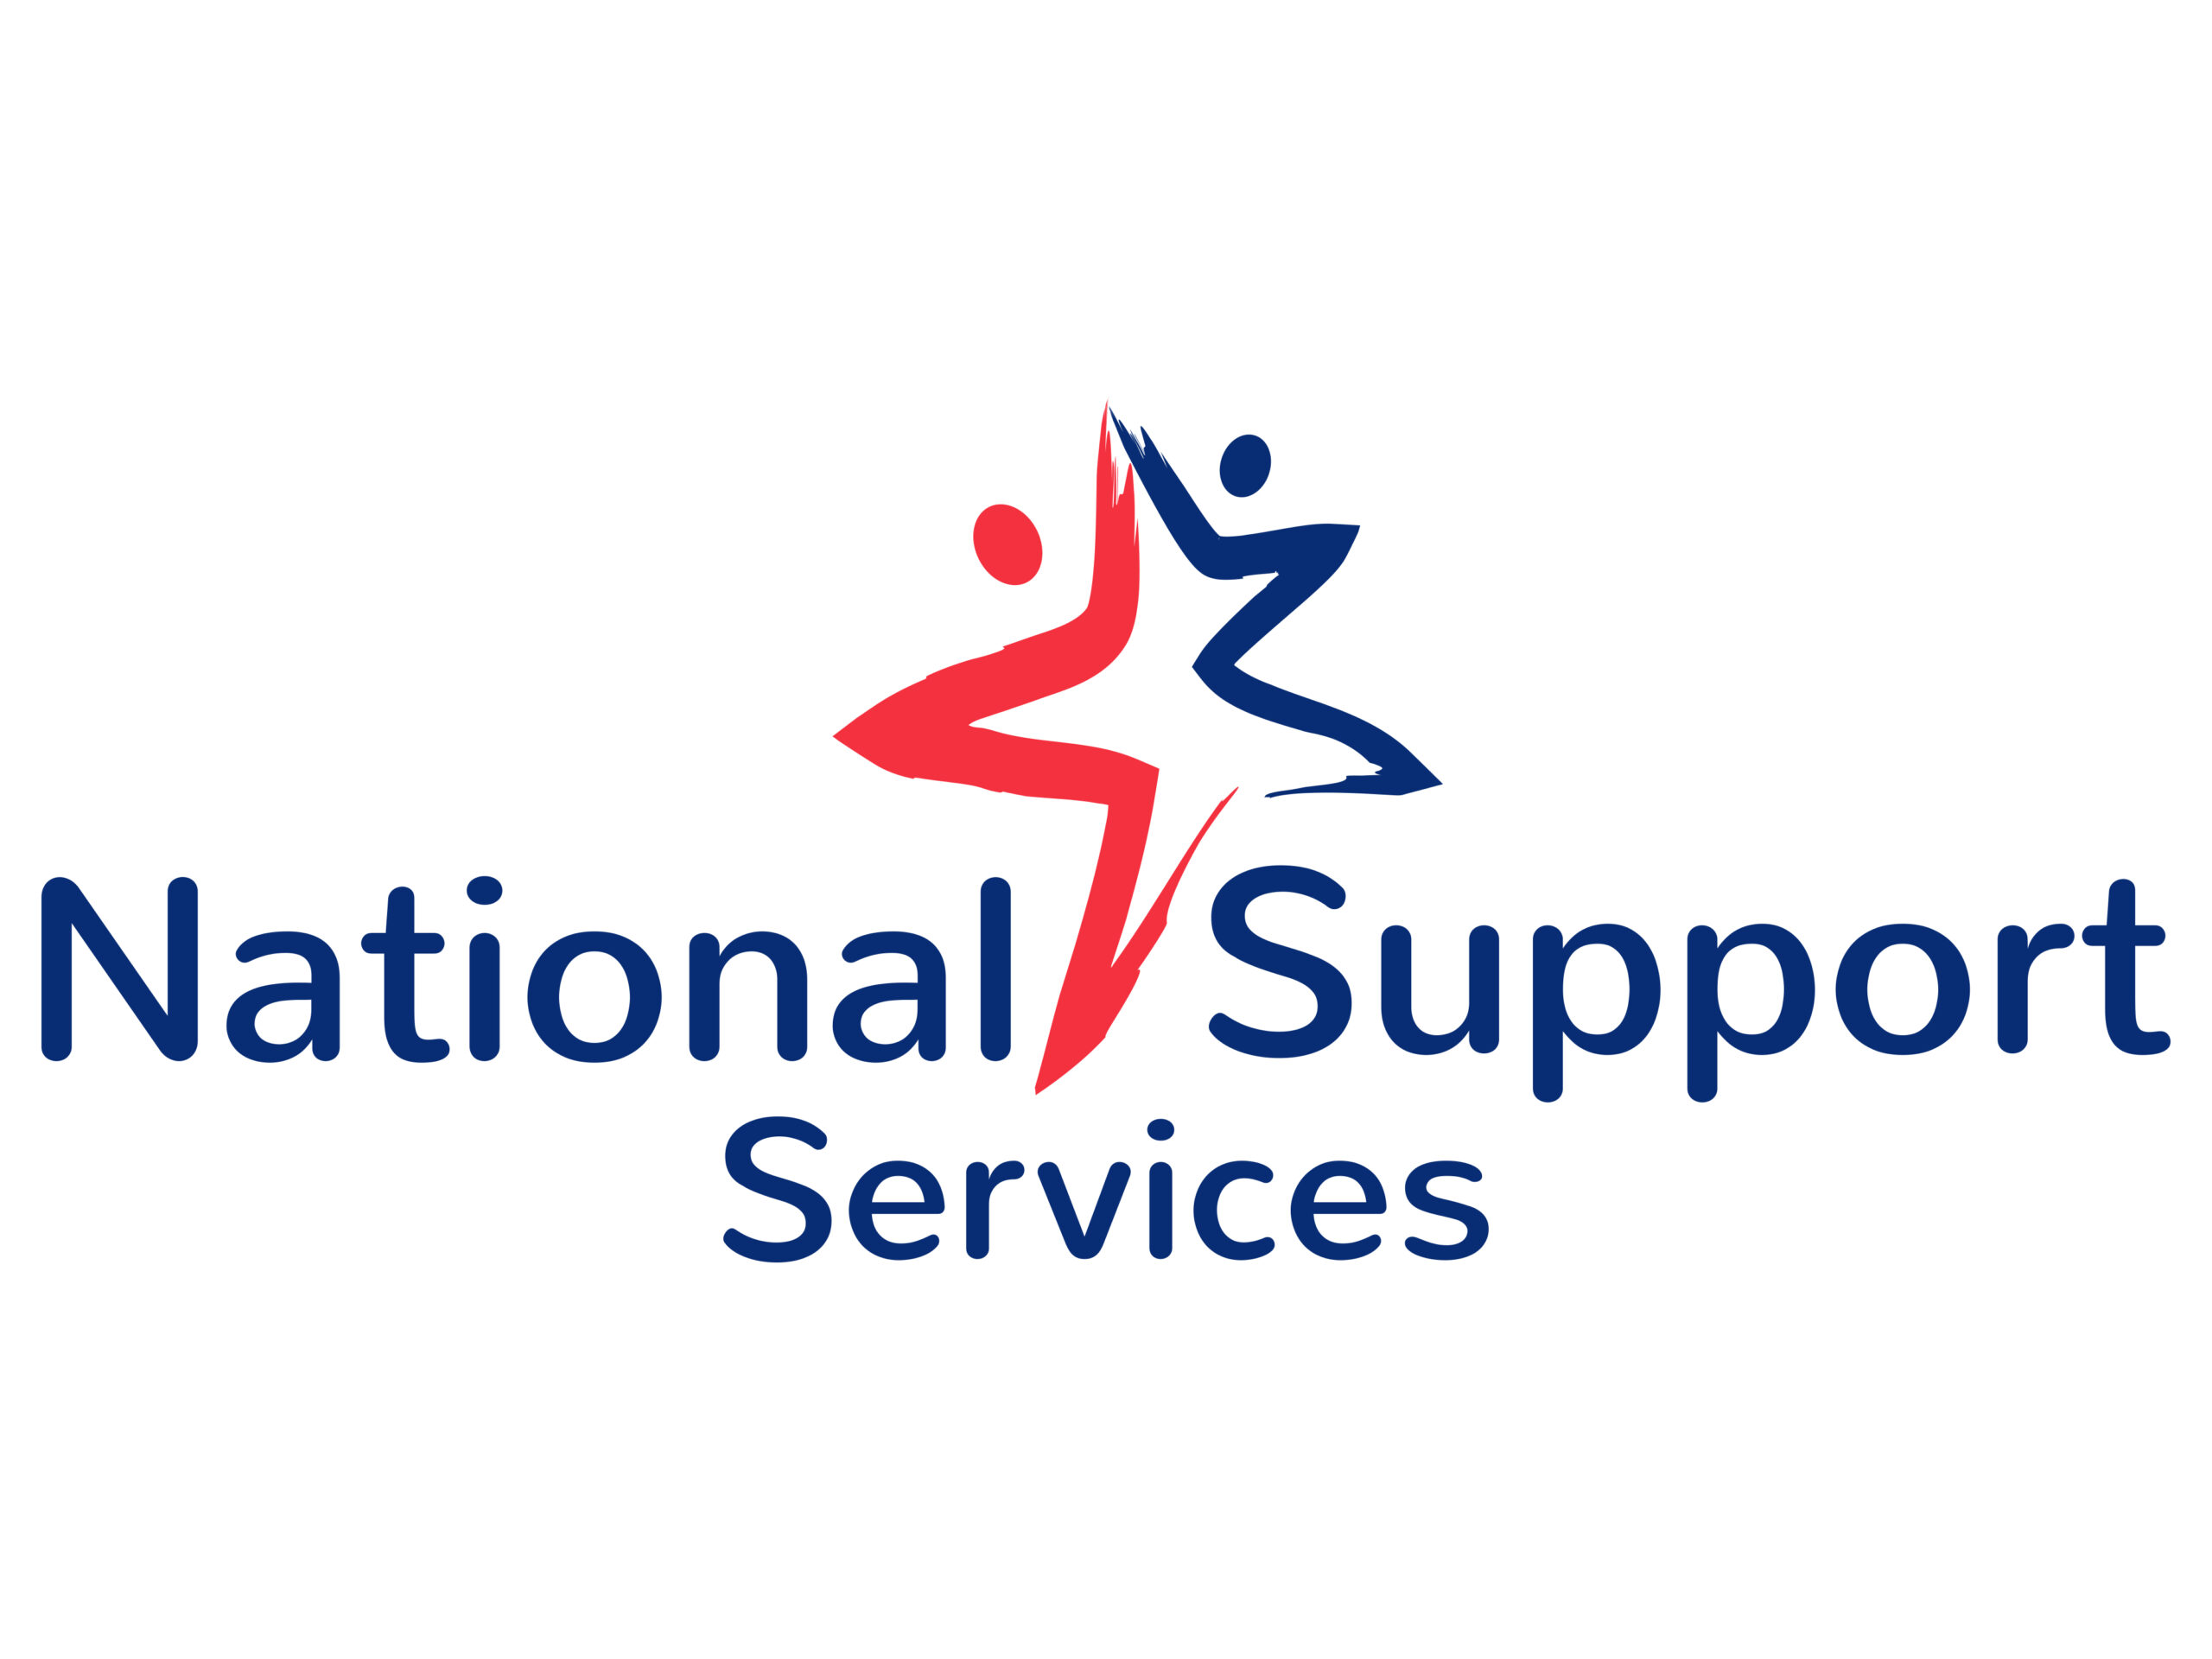 National Support Services logo